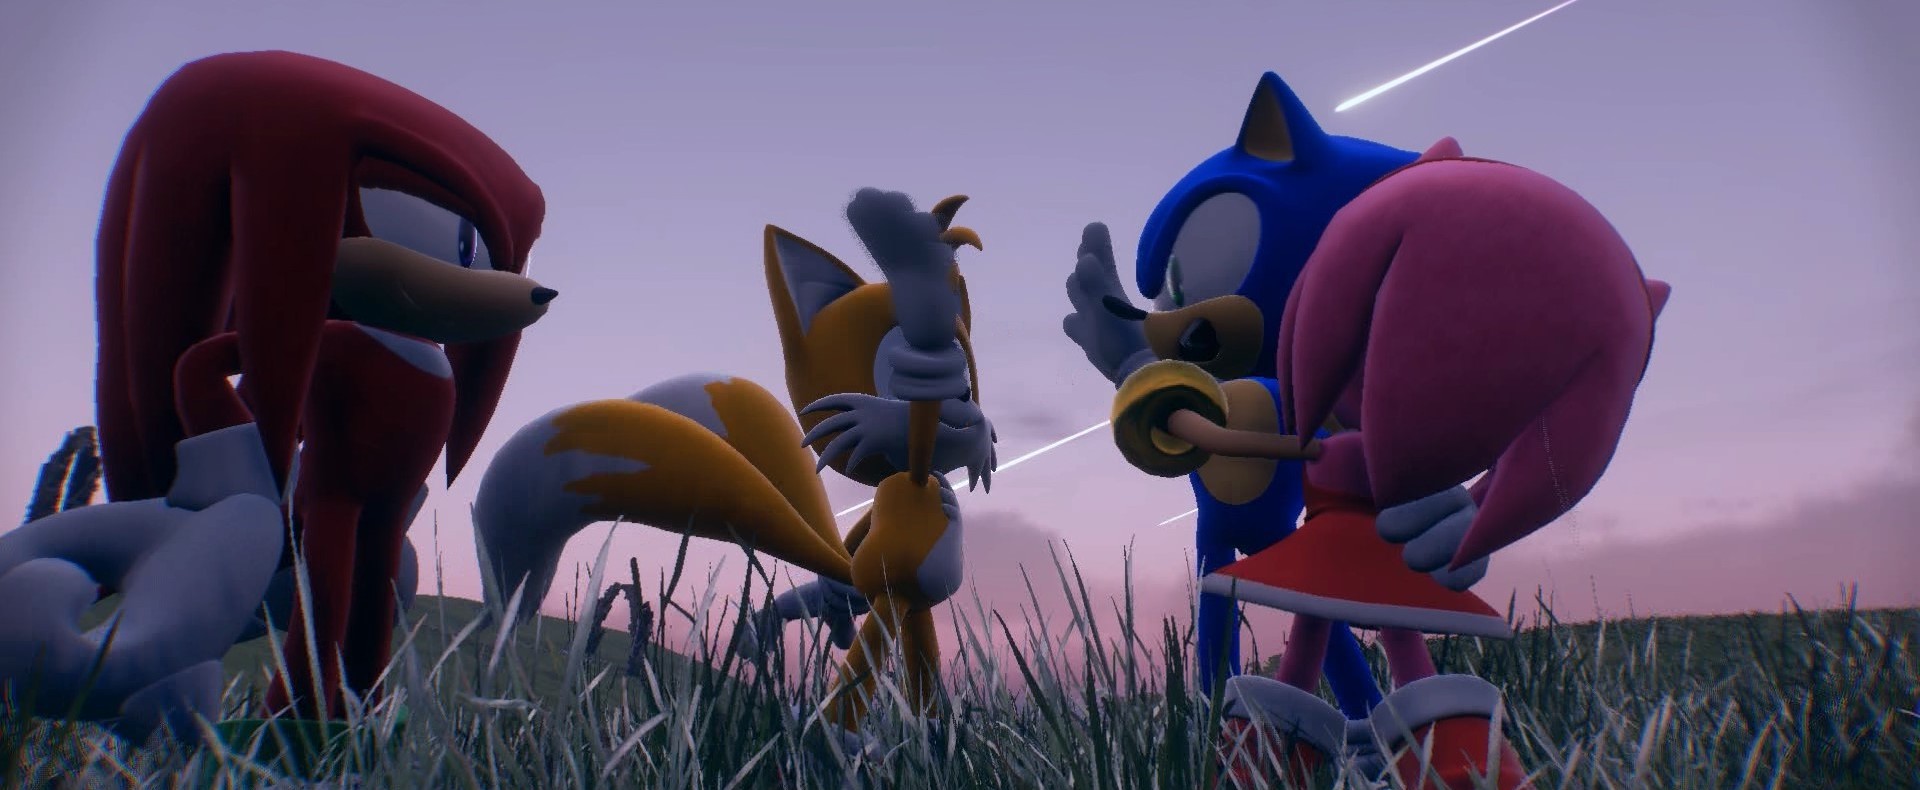 Isn't this right, Sonamy fans?